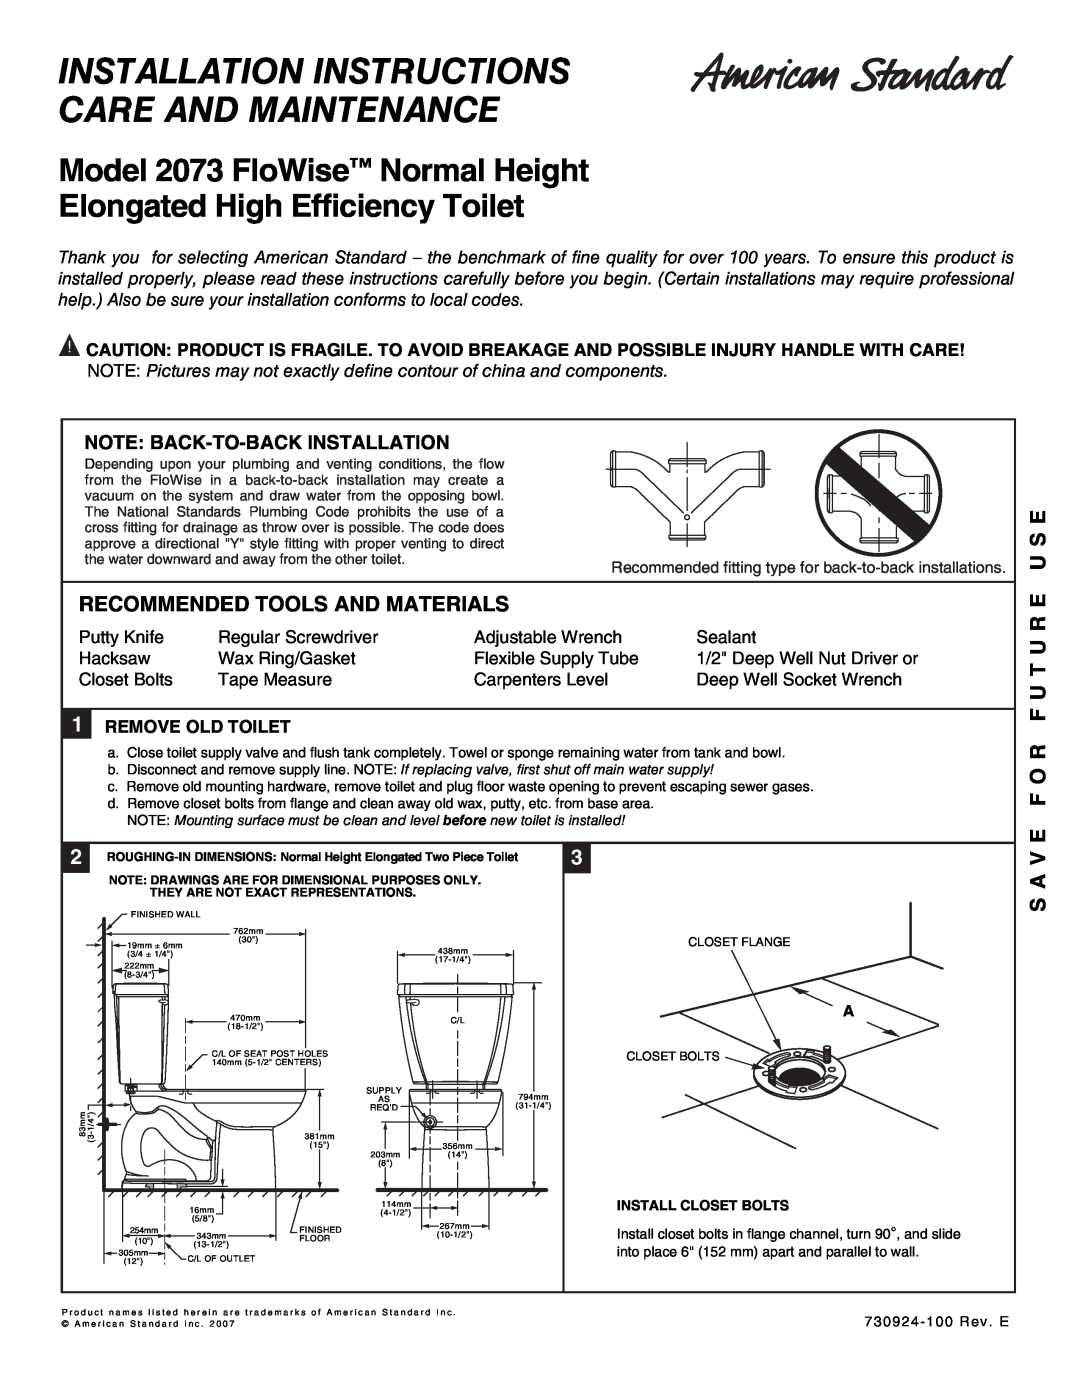 American Standard 2073 installation instructions Note Back-To-Back Installation, Remove Old Toilet 